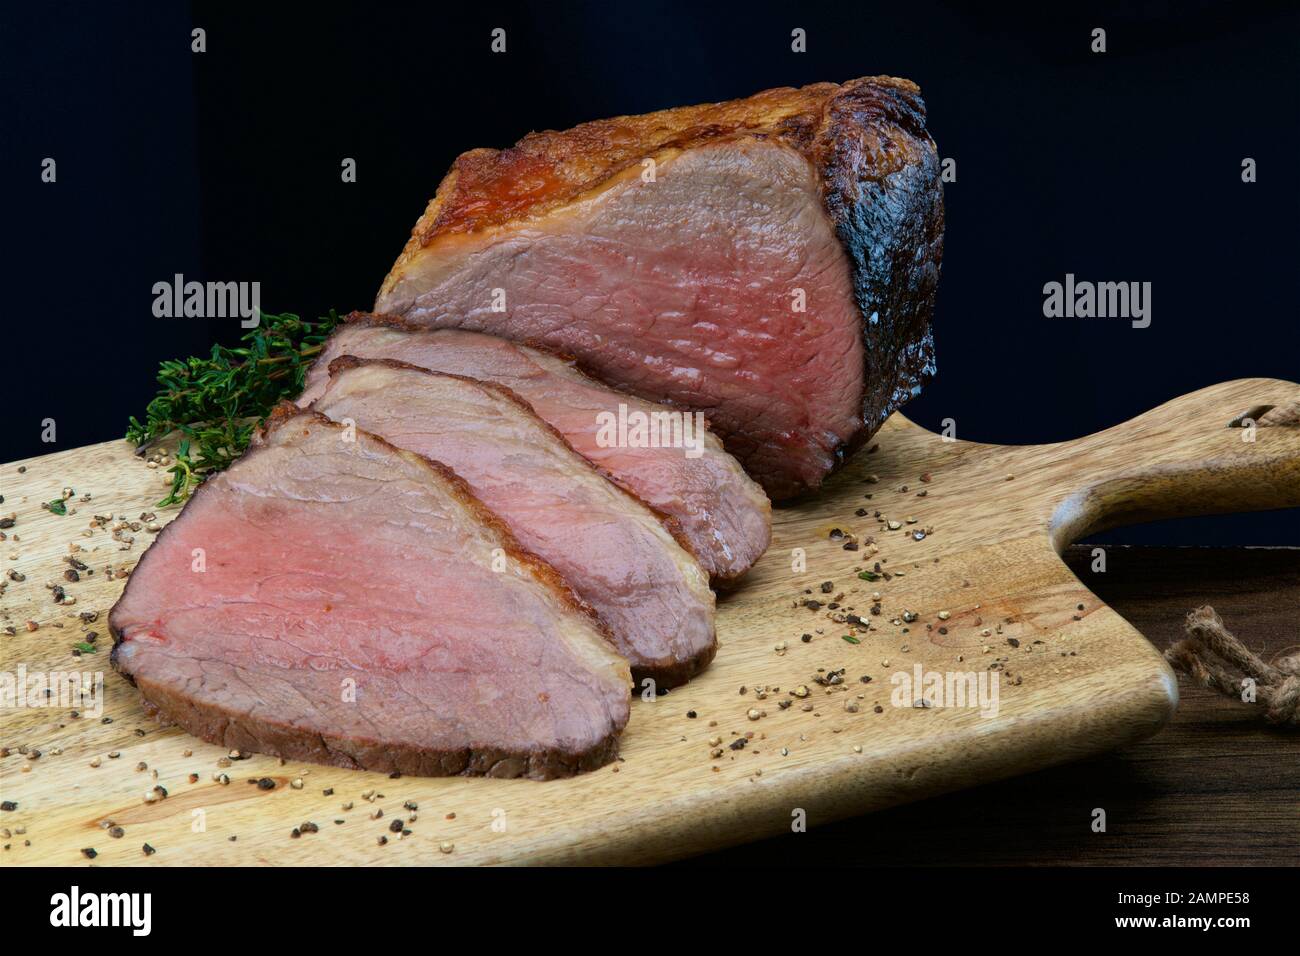 Close-up shot of a joint of juicy roast beef sliced on a wooden platter. Stock Photo